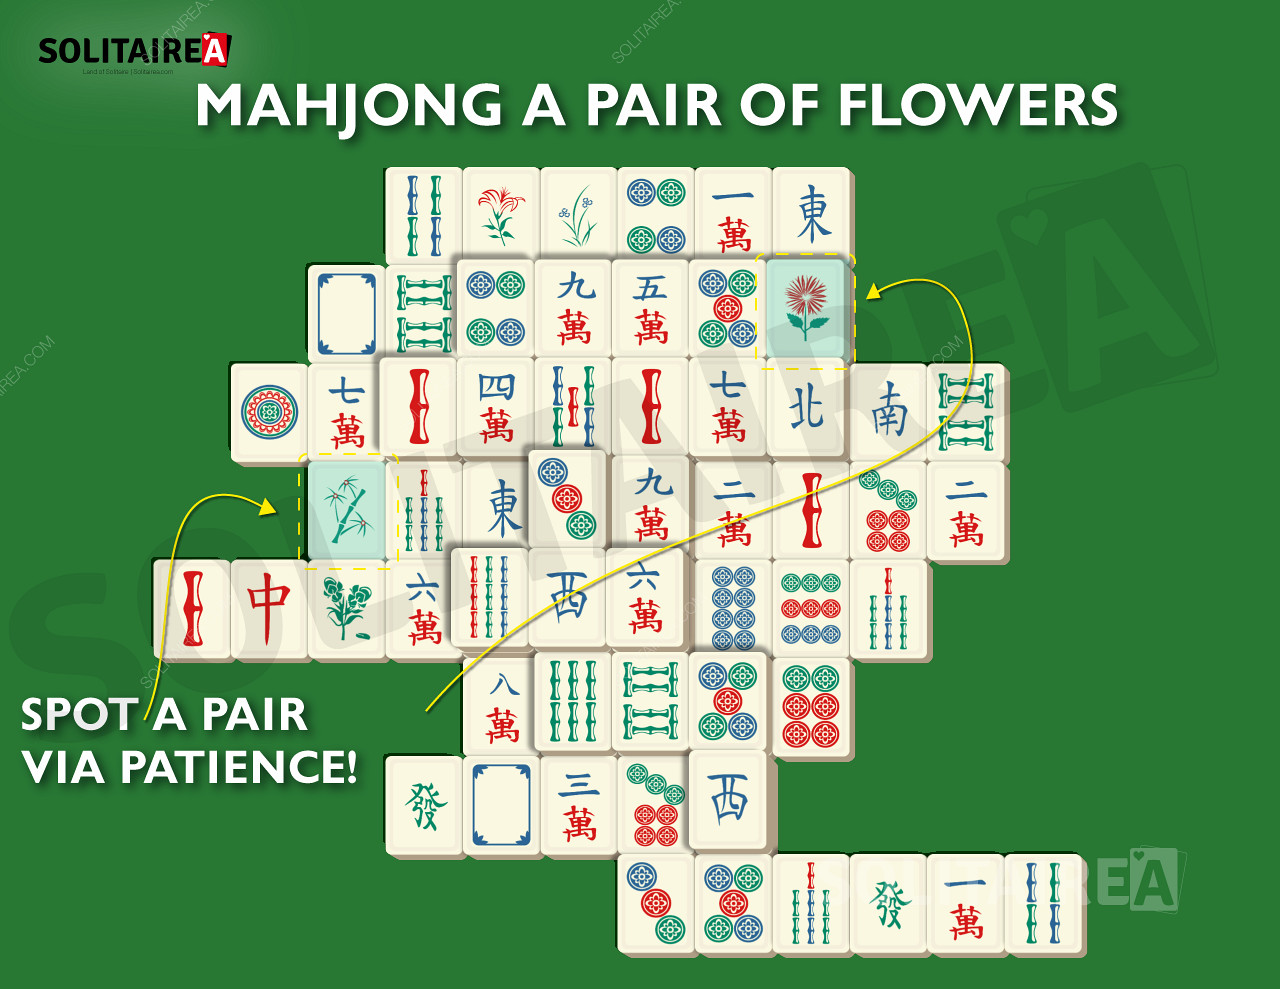 Mahjong Solitaire image showing a typical selection of tiles.